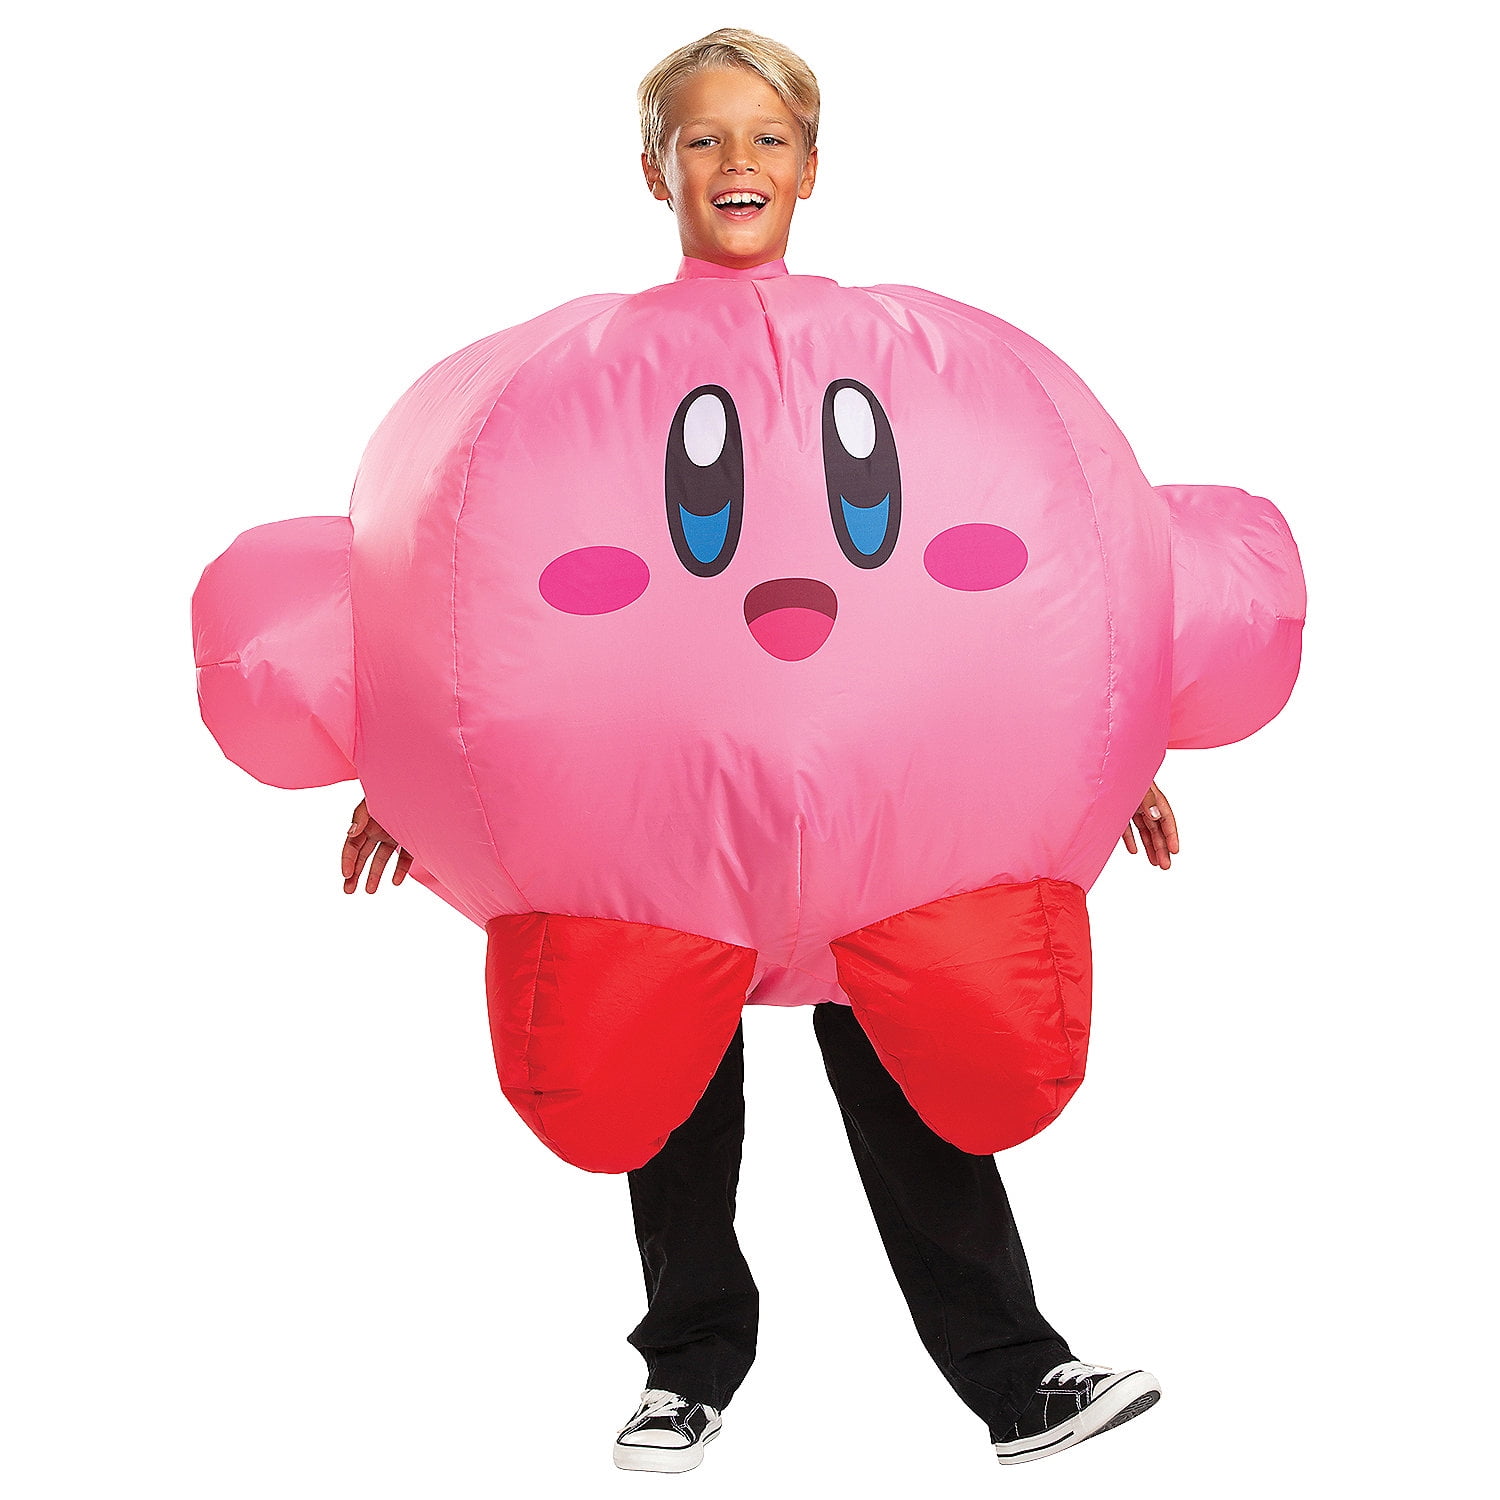 If The Kirby Movie Actually Became An Reality, What Would You